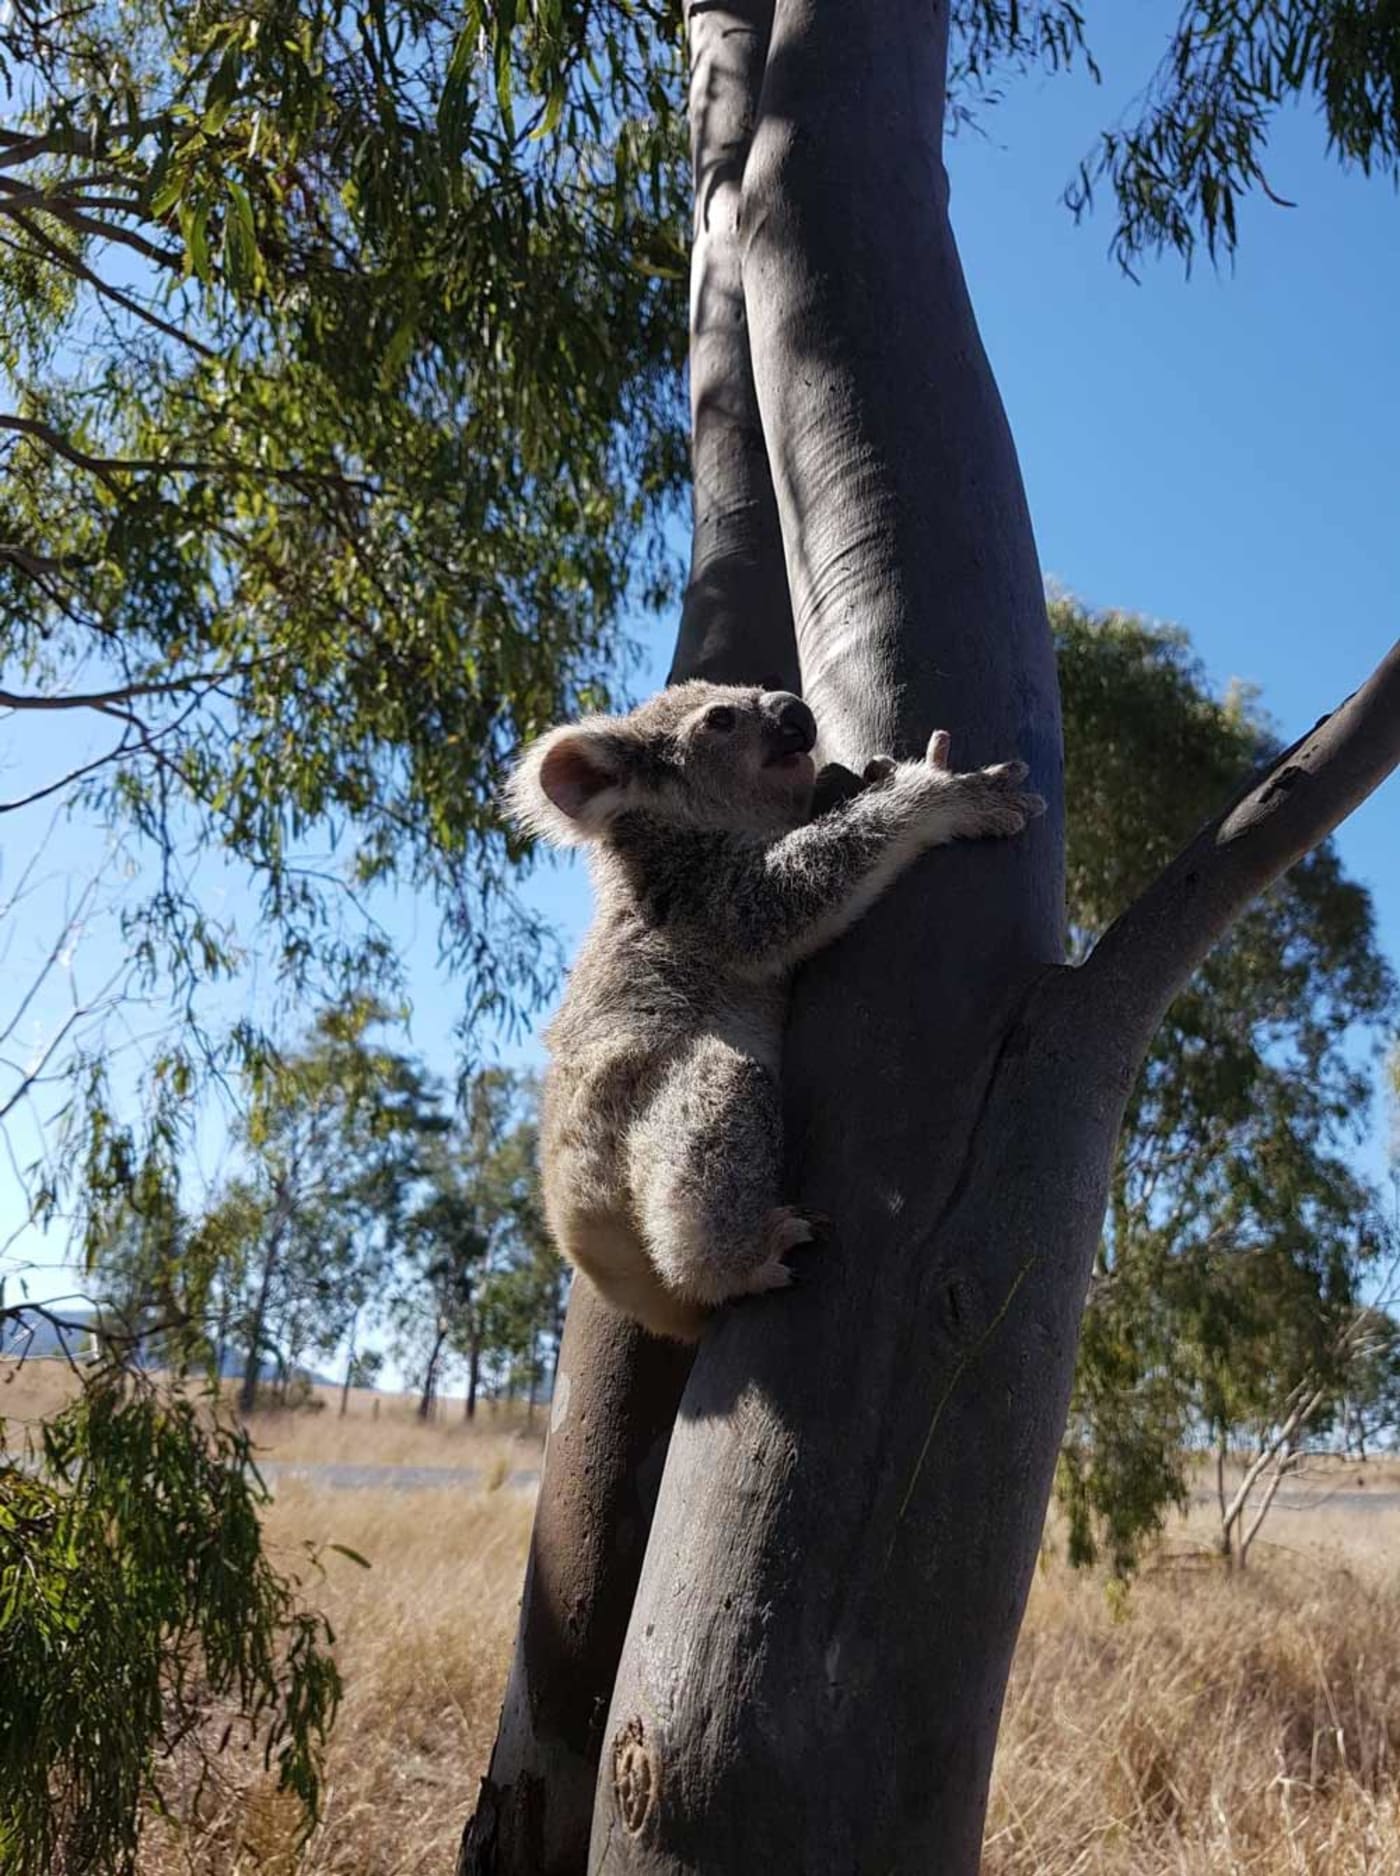 Koala joey clings to a tree at a family farm in Brisbane Valley= Queensland